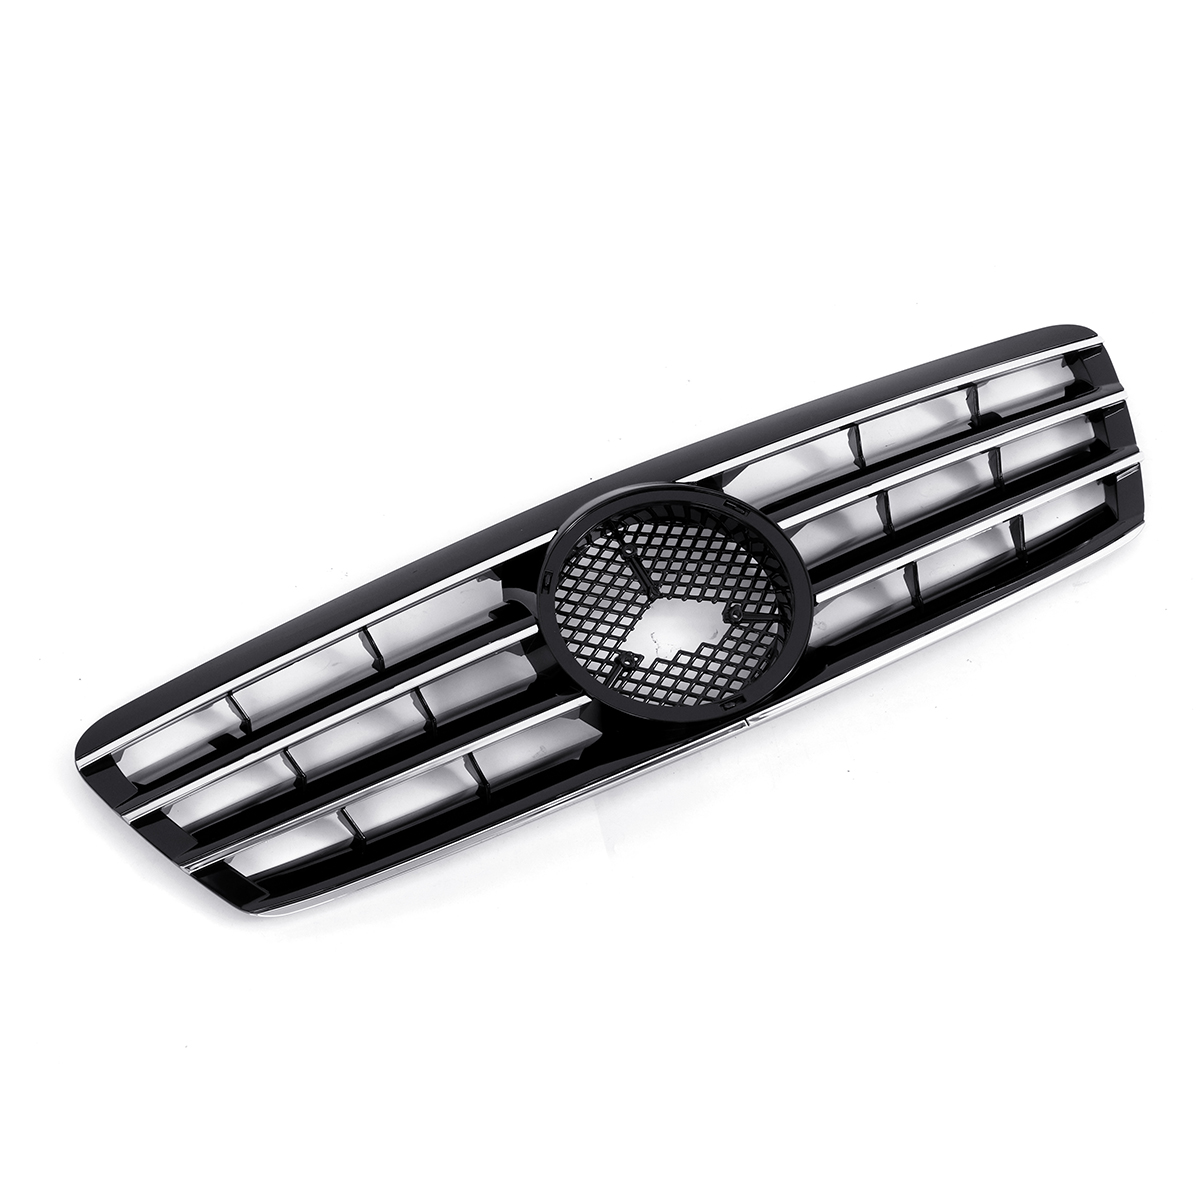 Glossy Black Front Upper Grill Grille for Mercedes Benz W203 C200 C230 C240 C320 2001- 2007 C Class